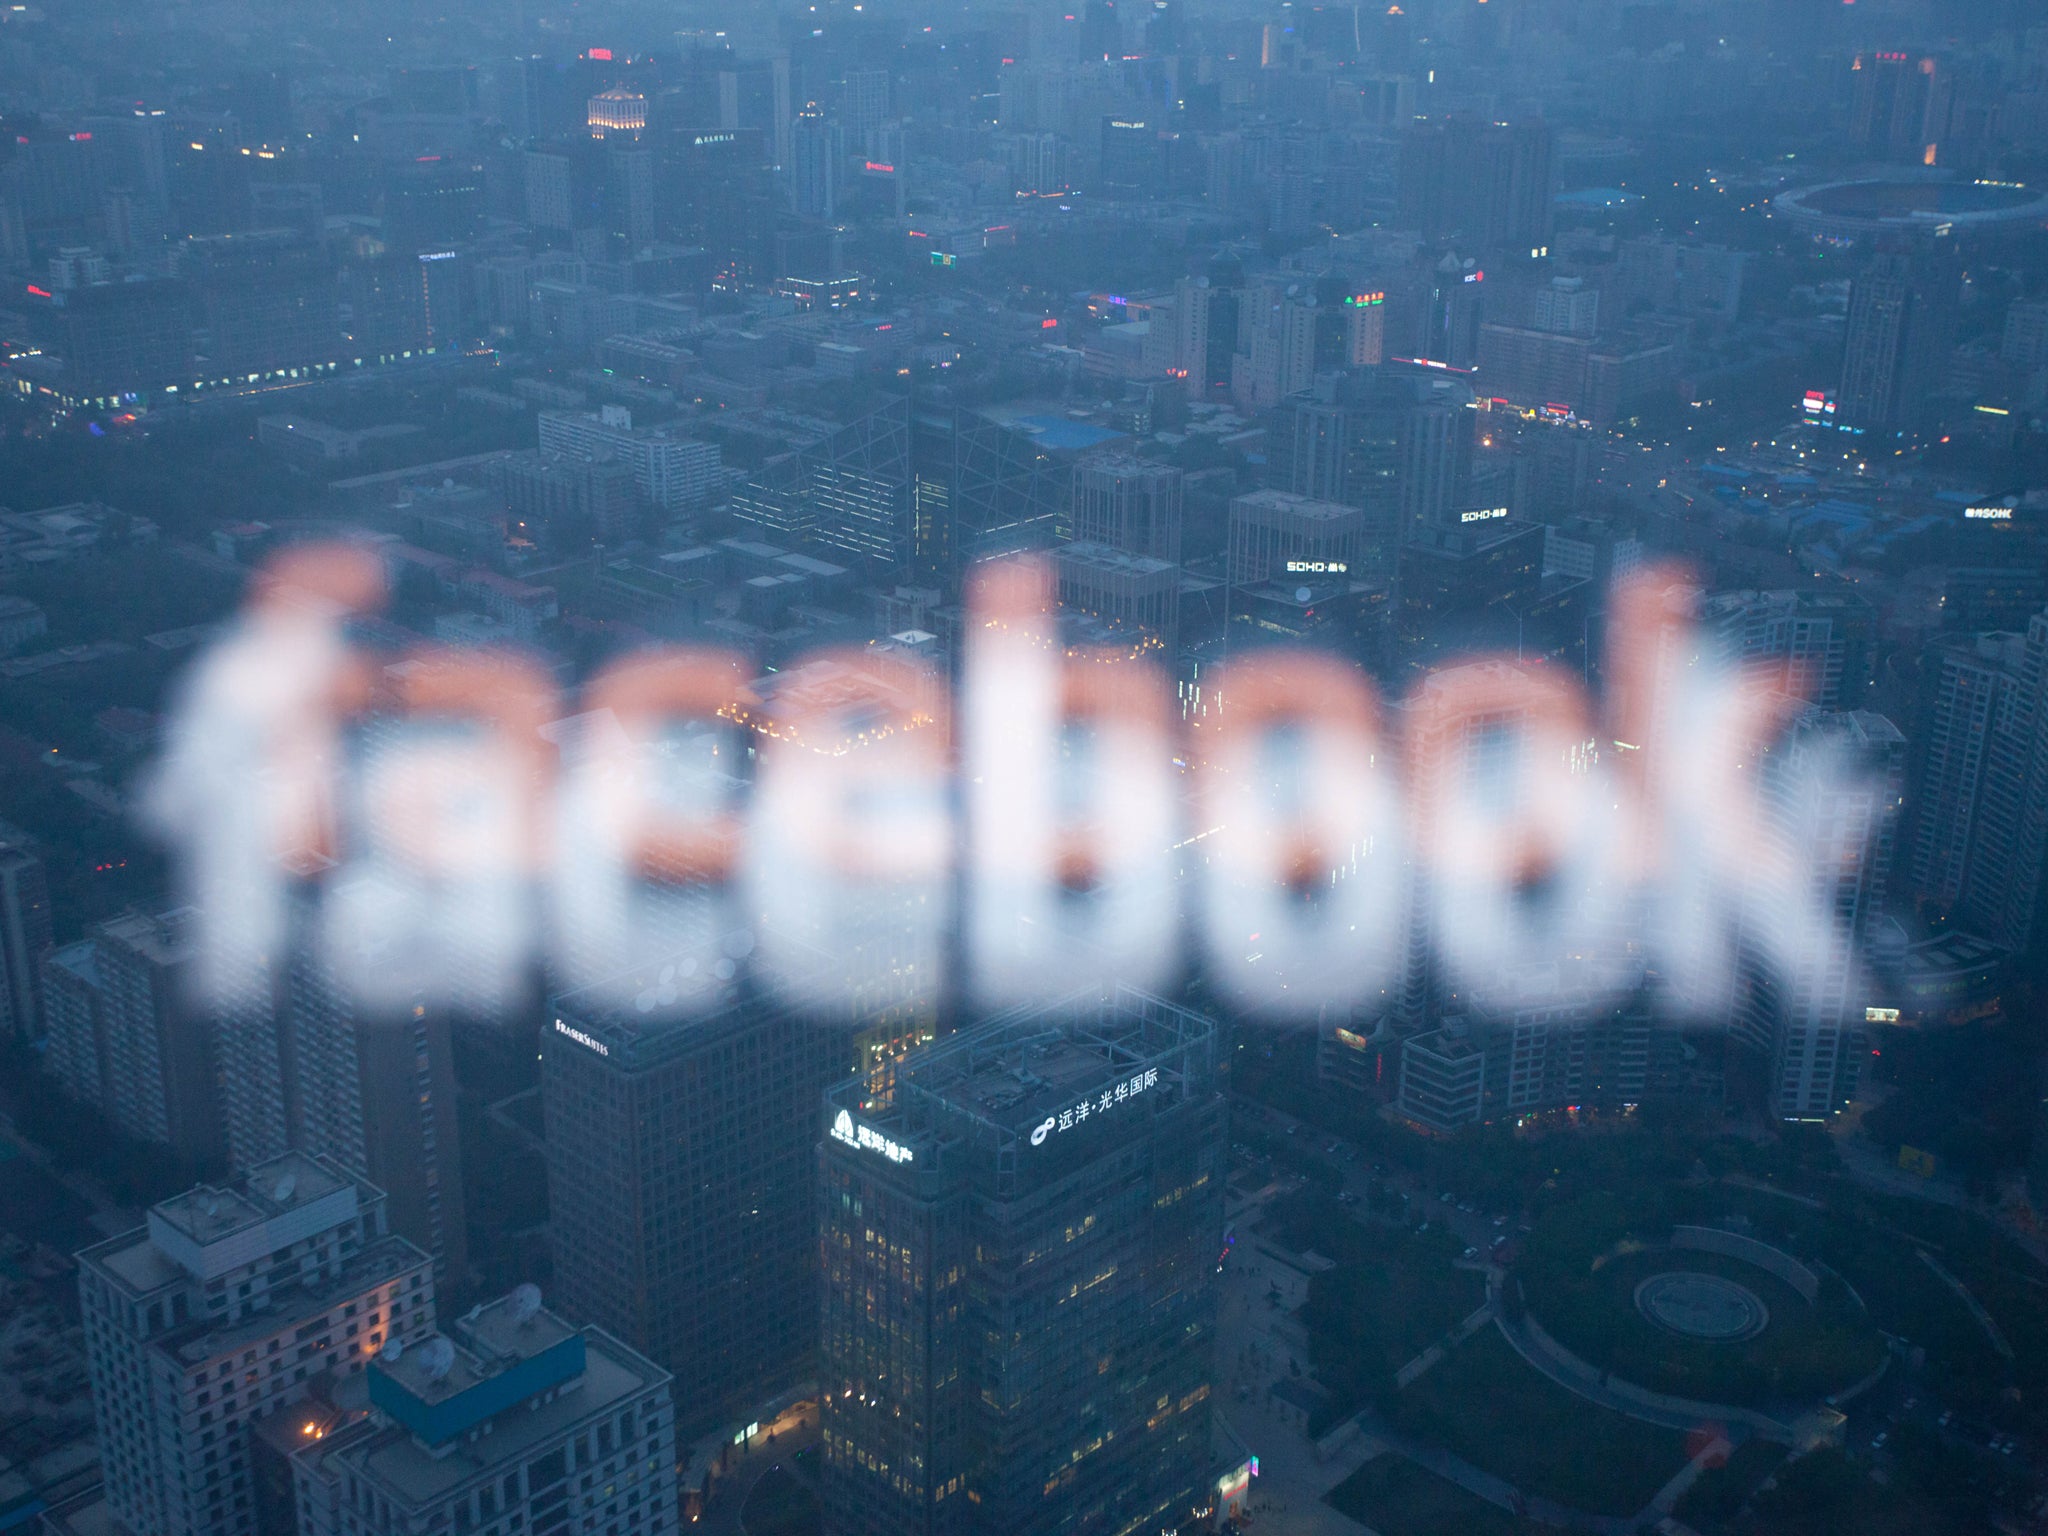 A photo taken on May 16, 2012 shows a computer screen displaying the logo of social networking site Facebook reflected in a window before the Beijing skyline